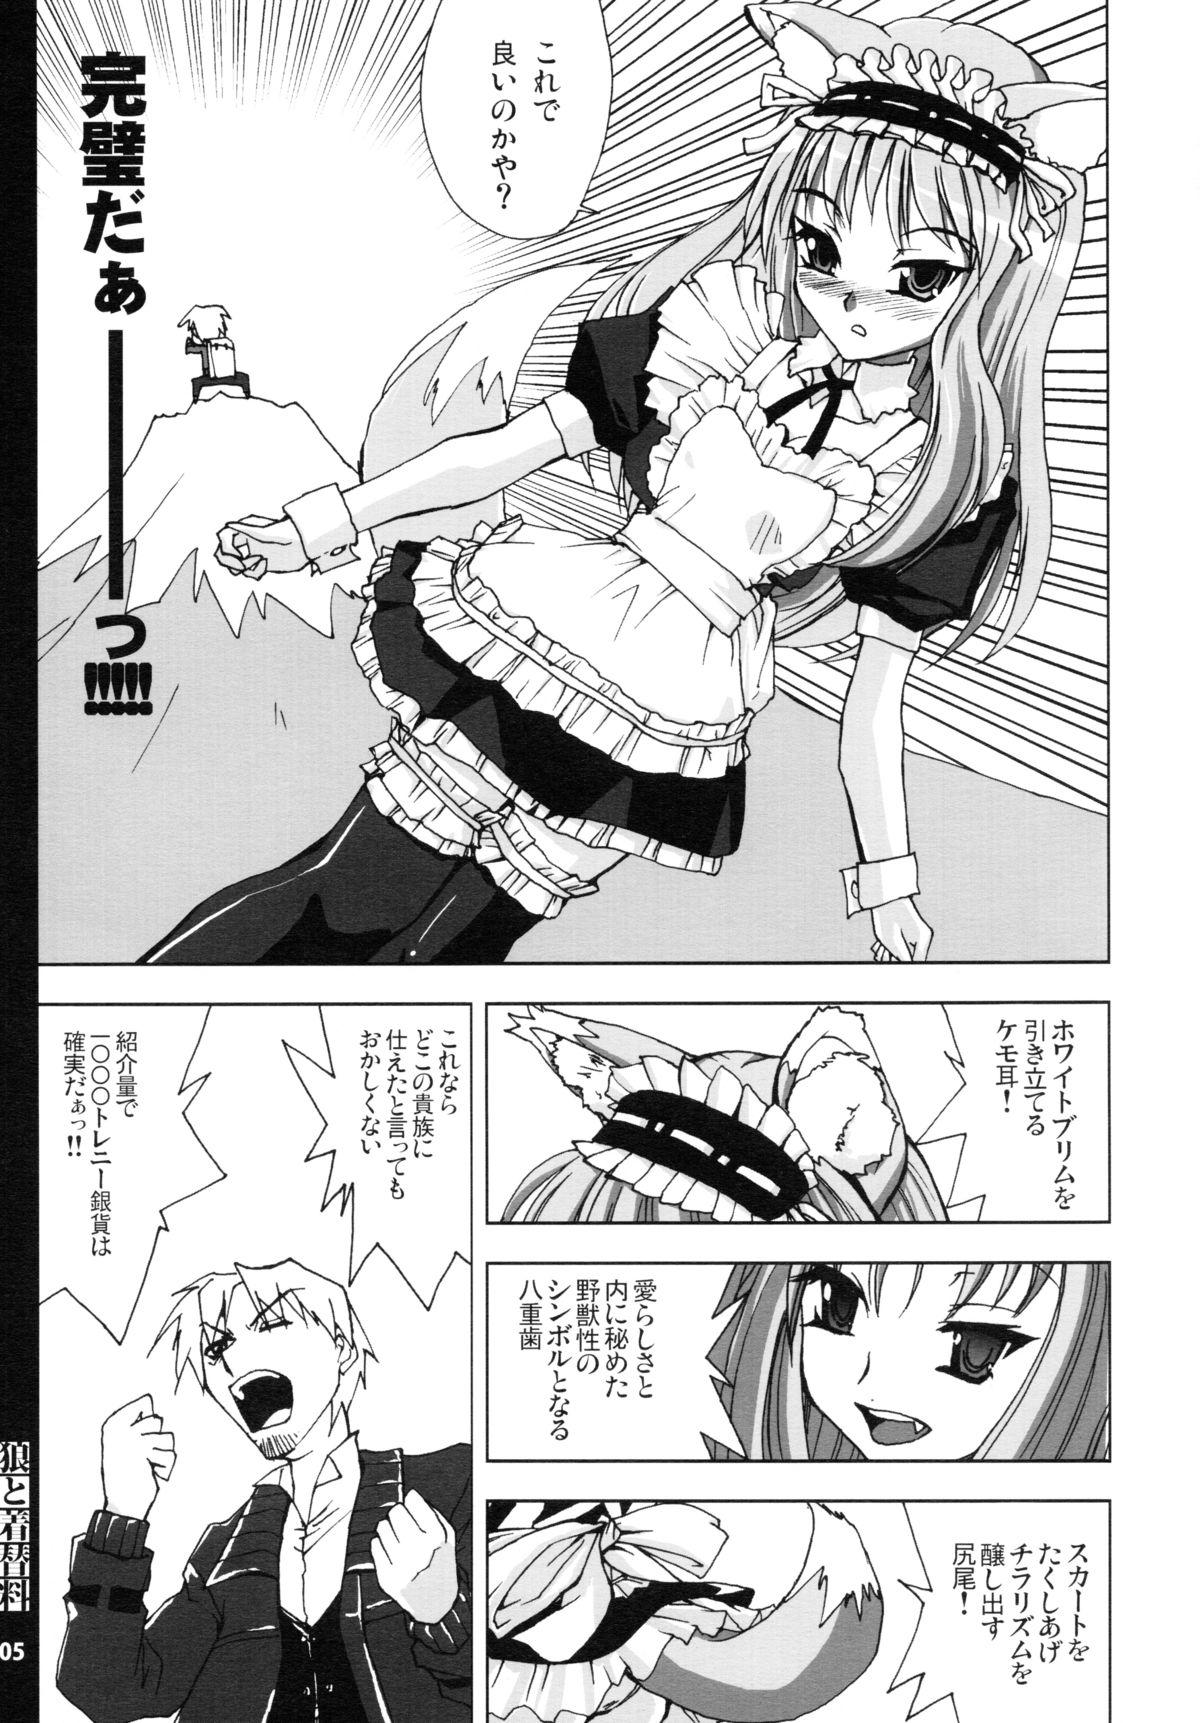 Homo Ookami to Cosplay-ryou - Spice and wolf Bwc - Page 5